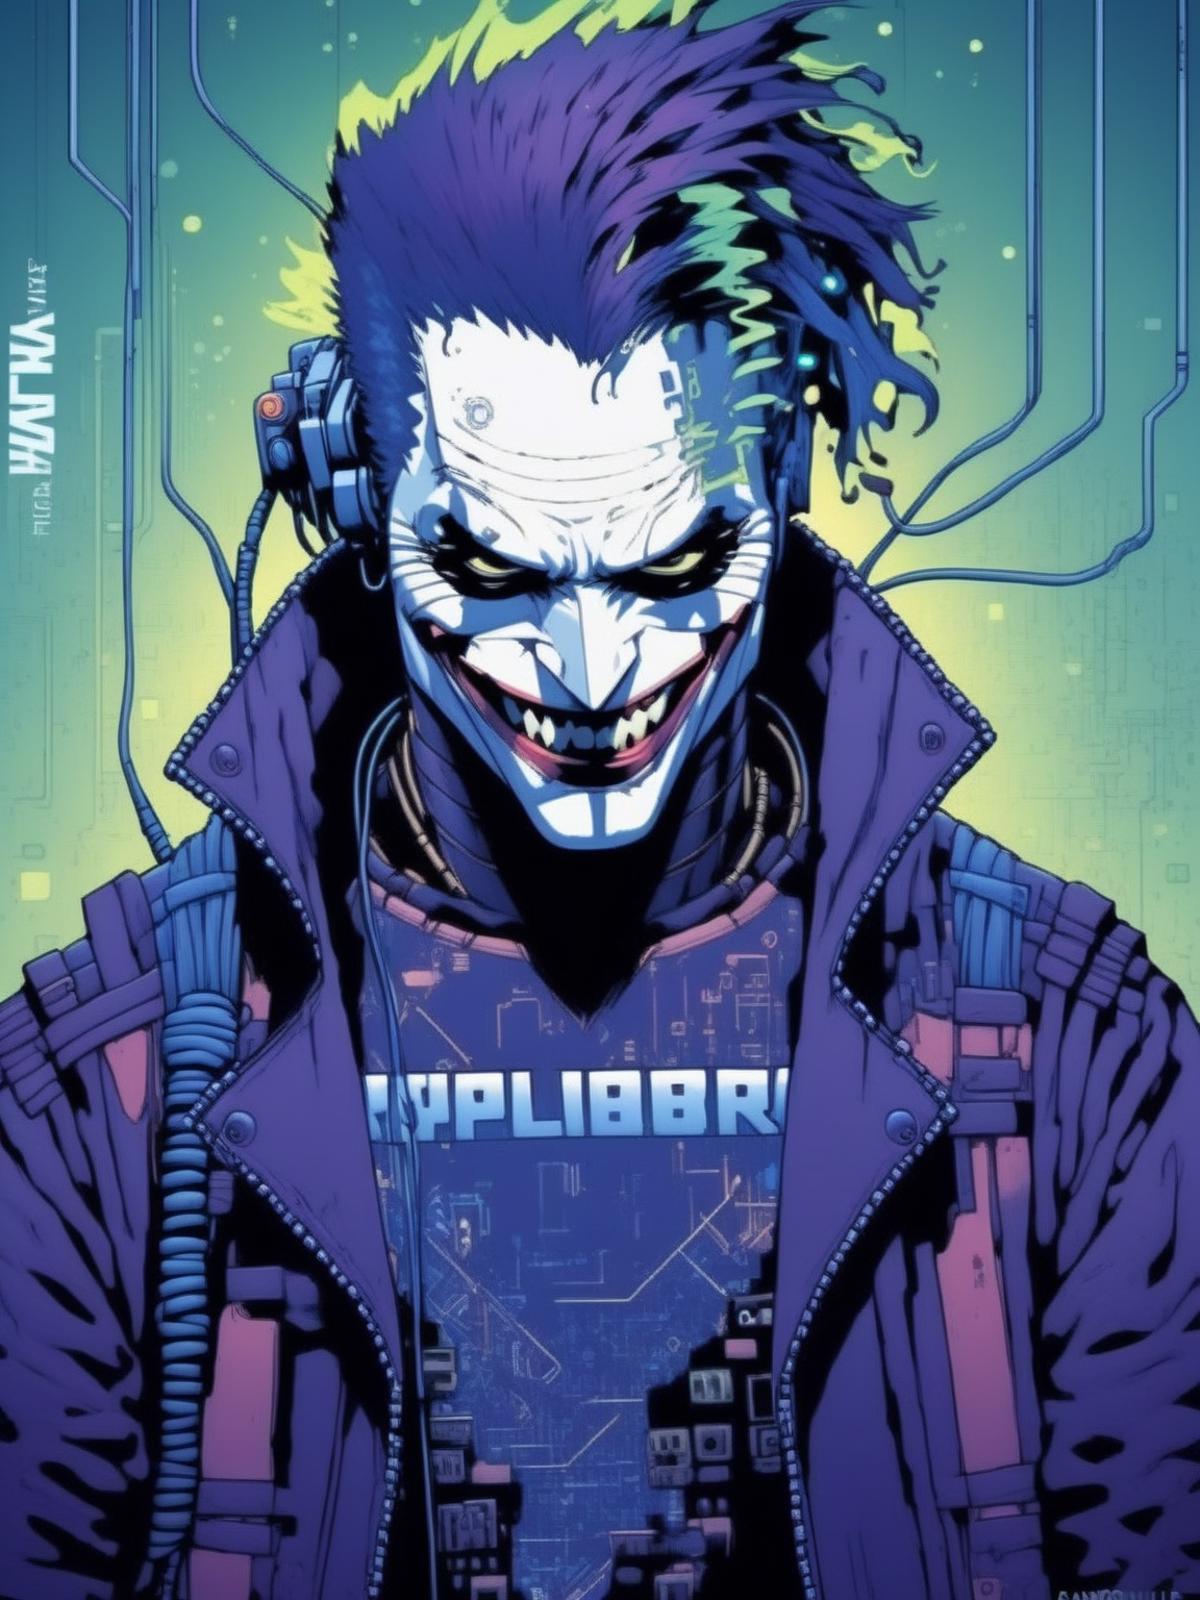 A purple and black comic book image of a clown named Joker.